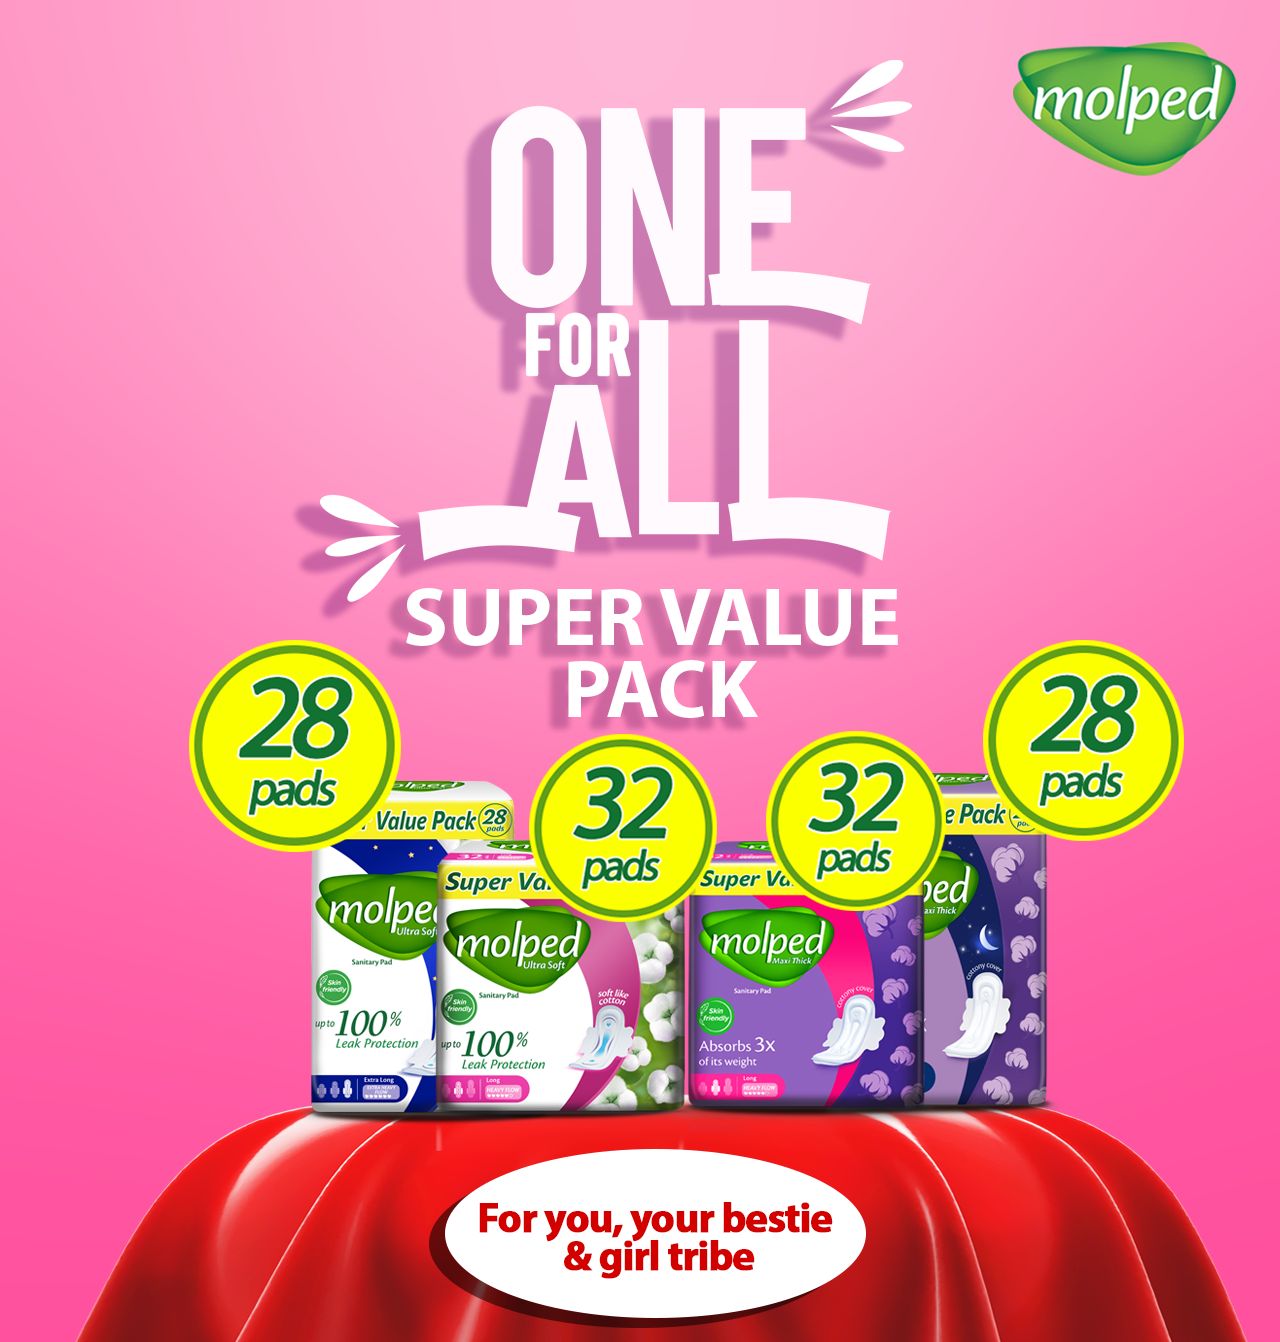 MOLPED launches their Super Value Pack Sanitary Pad for the Girl